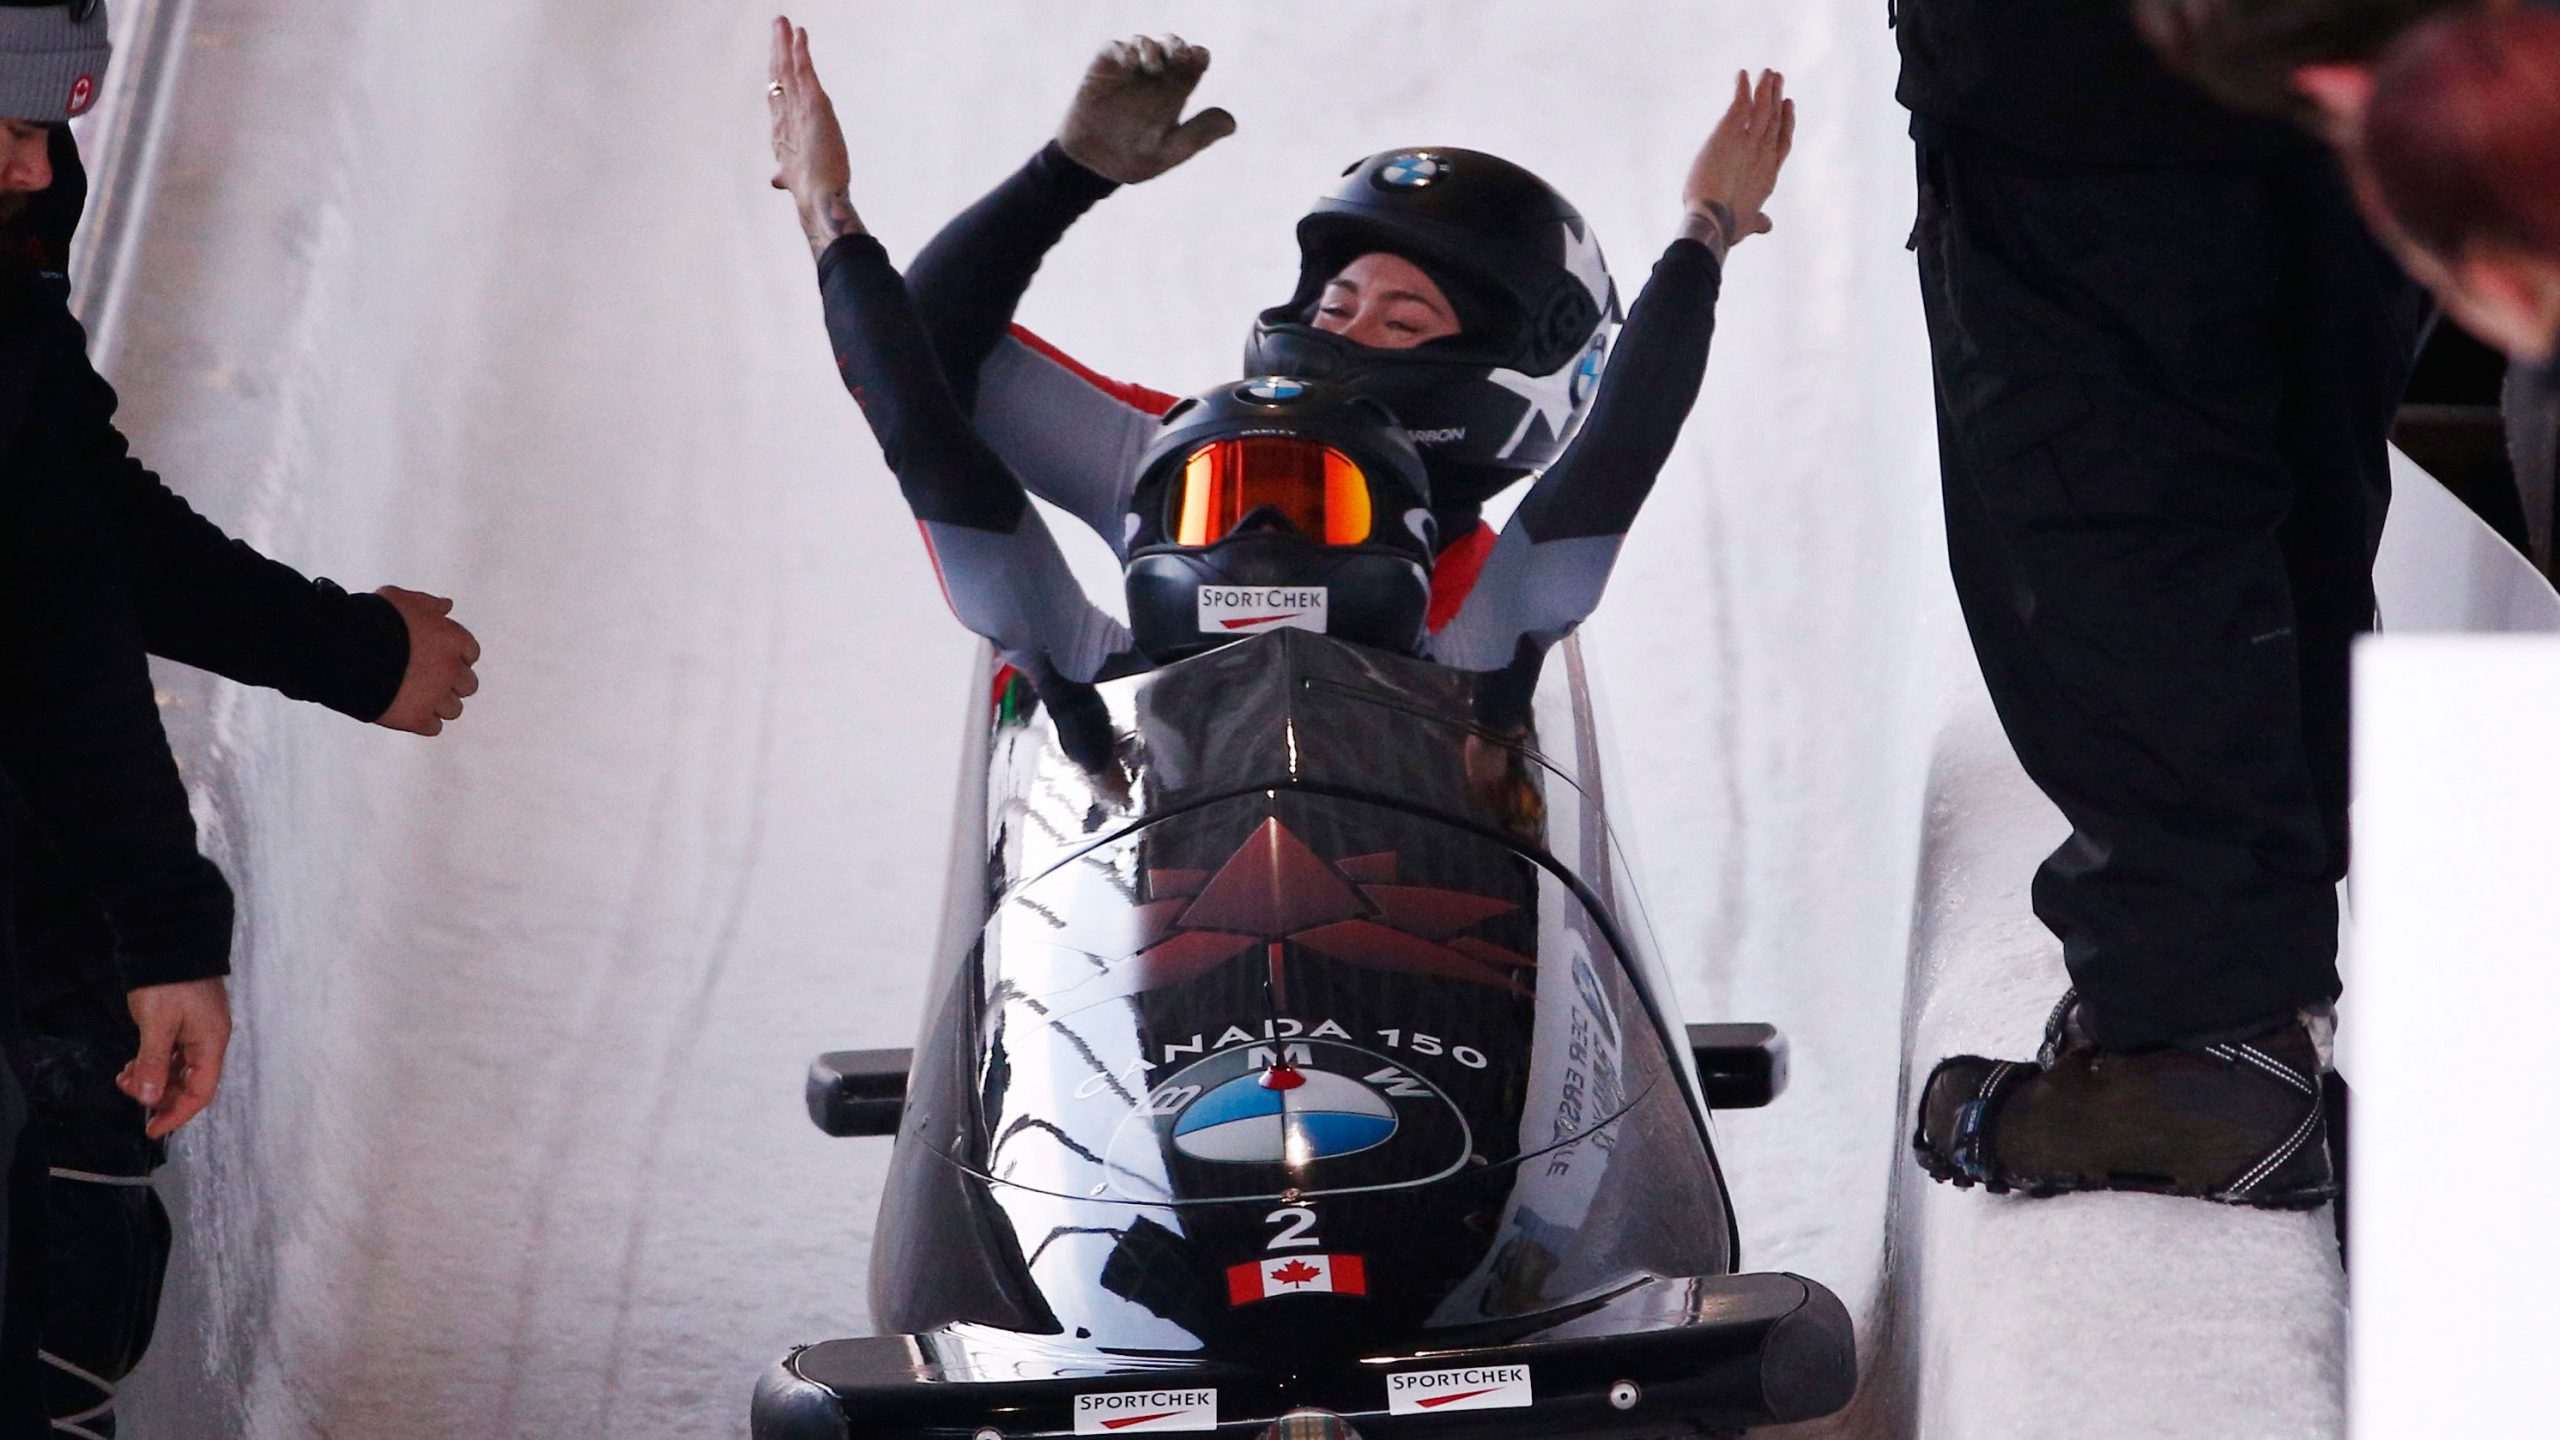 Canada’s Humphries opens World Cup bobsled with win